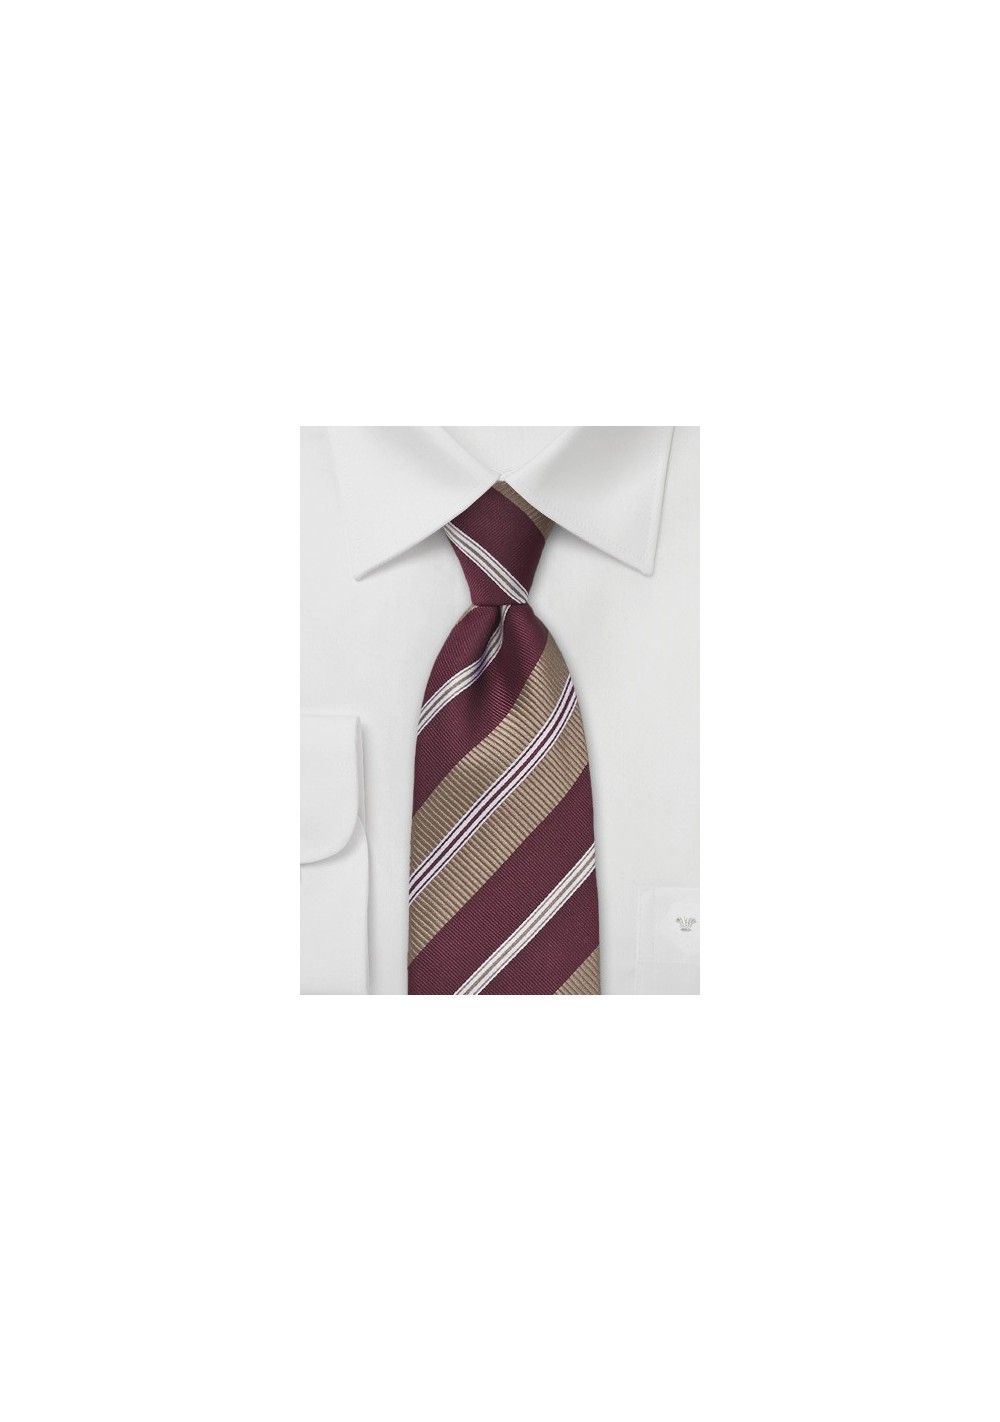 Wide Striped Tie in Bordeaux and Bronze